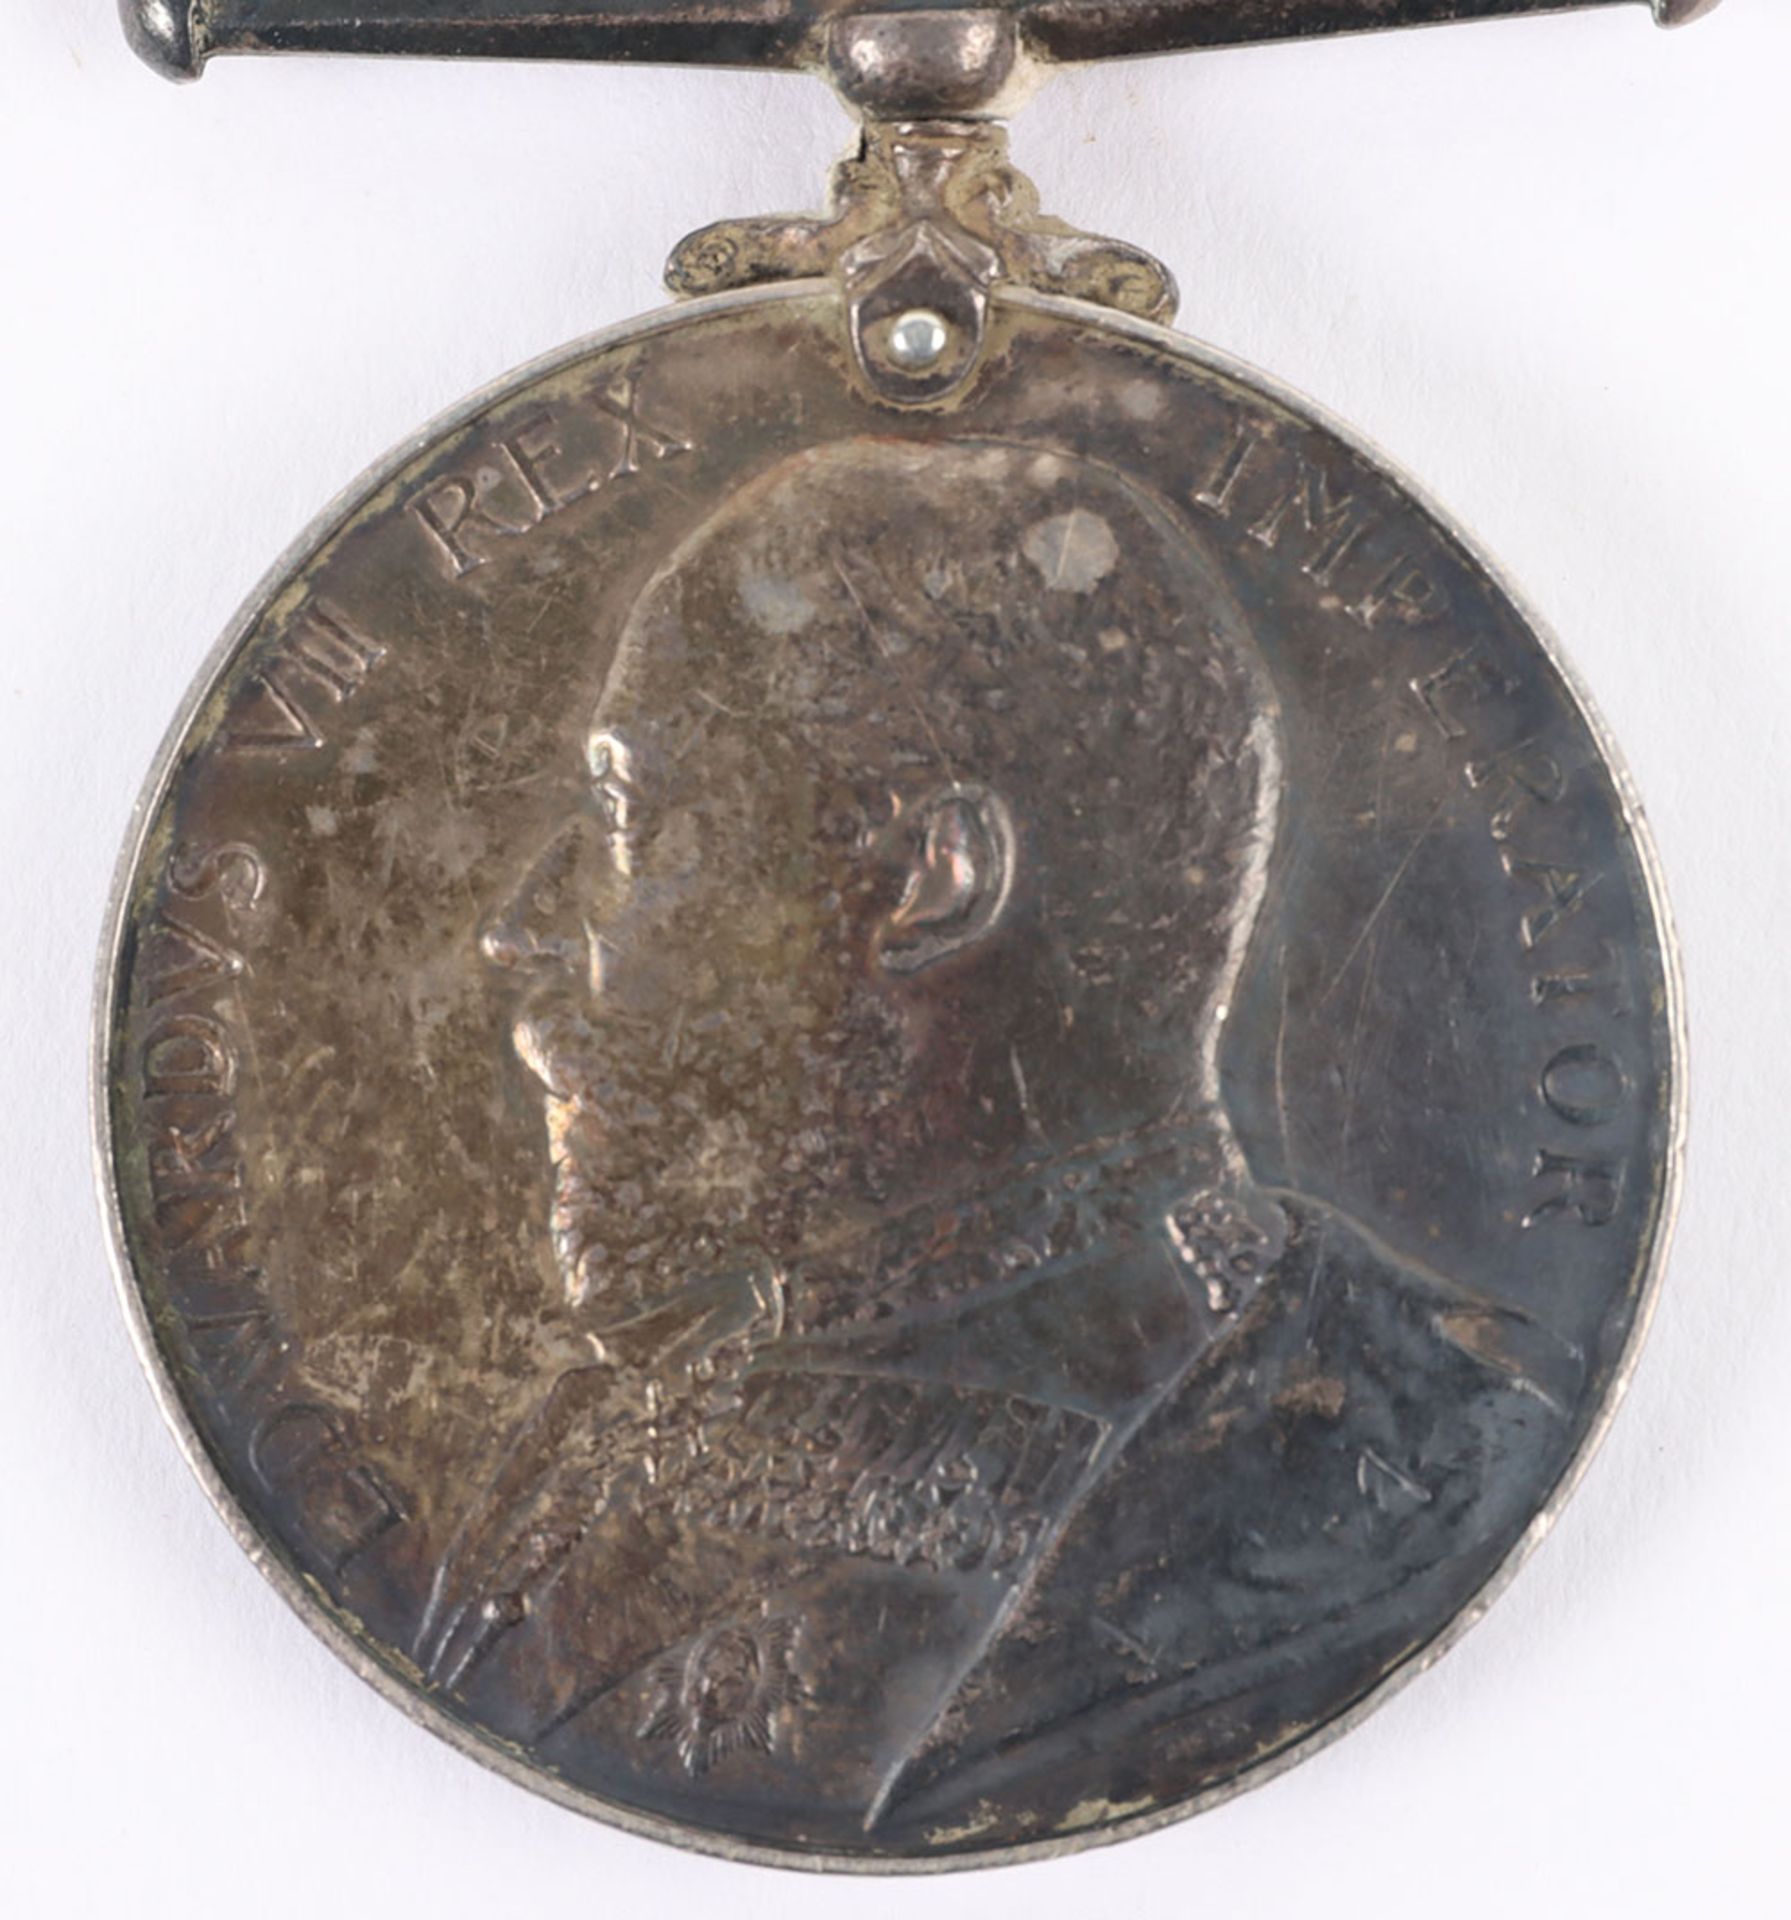 Kings South Africa Medal 2nd Dragoons (Royal Scots Greys) - Image 3 of 6